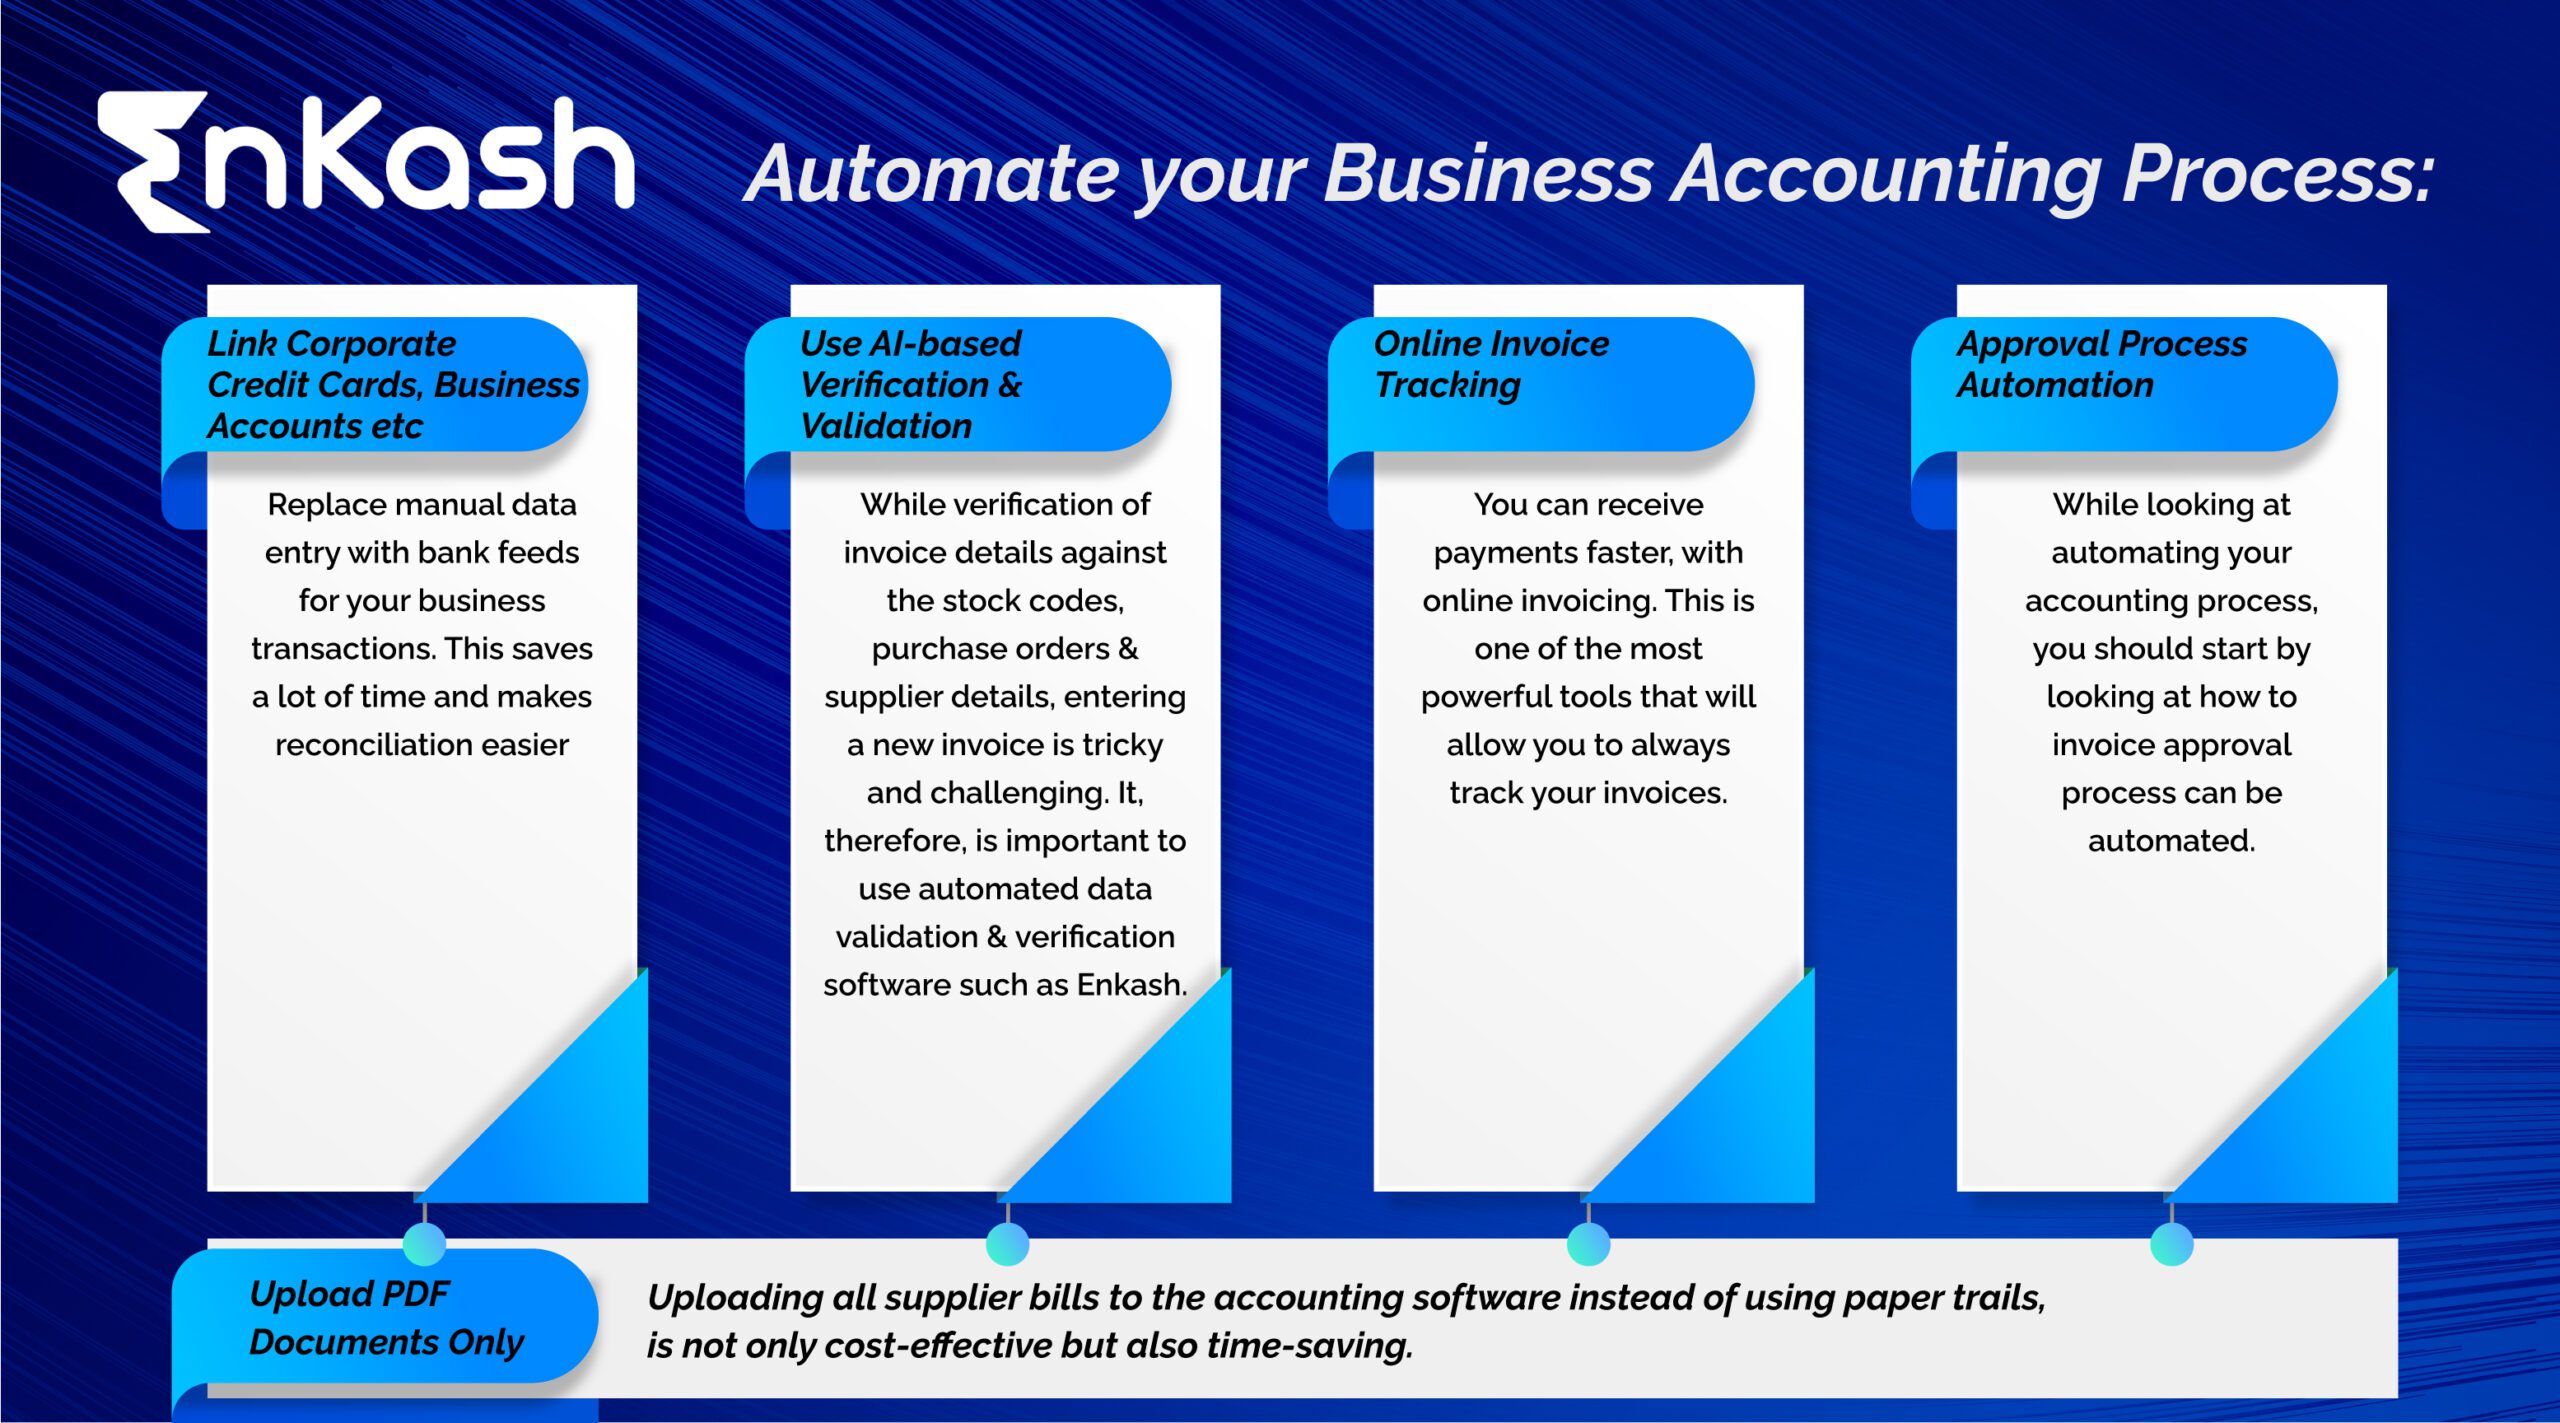 Automate your business accounting process